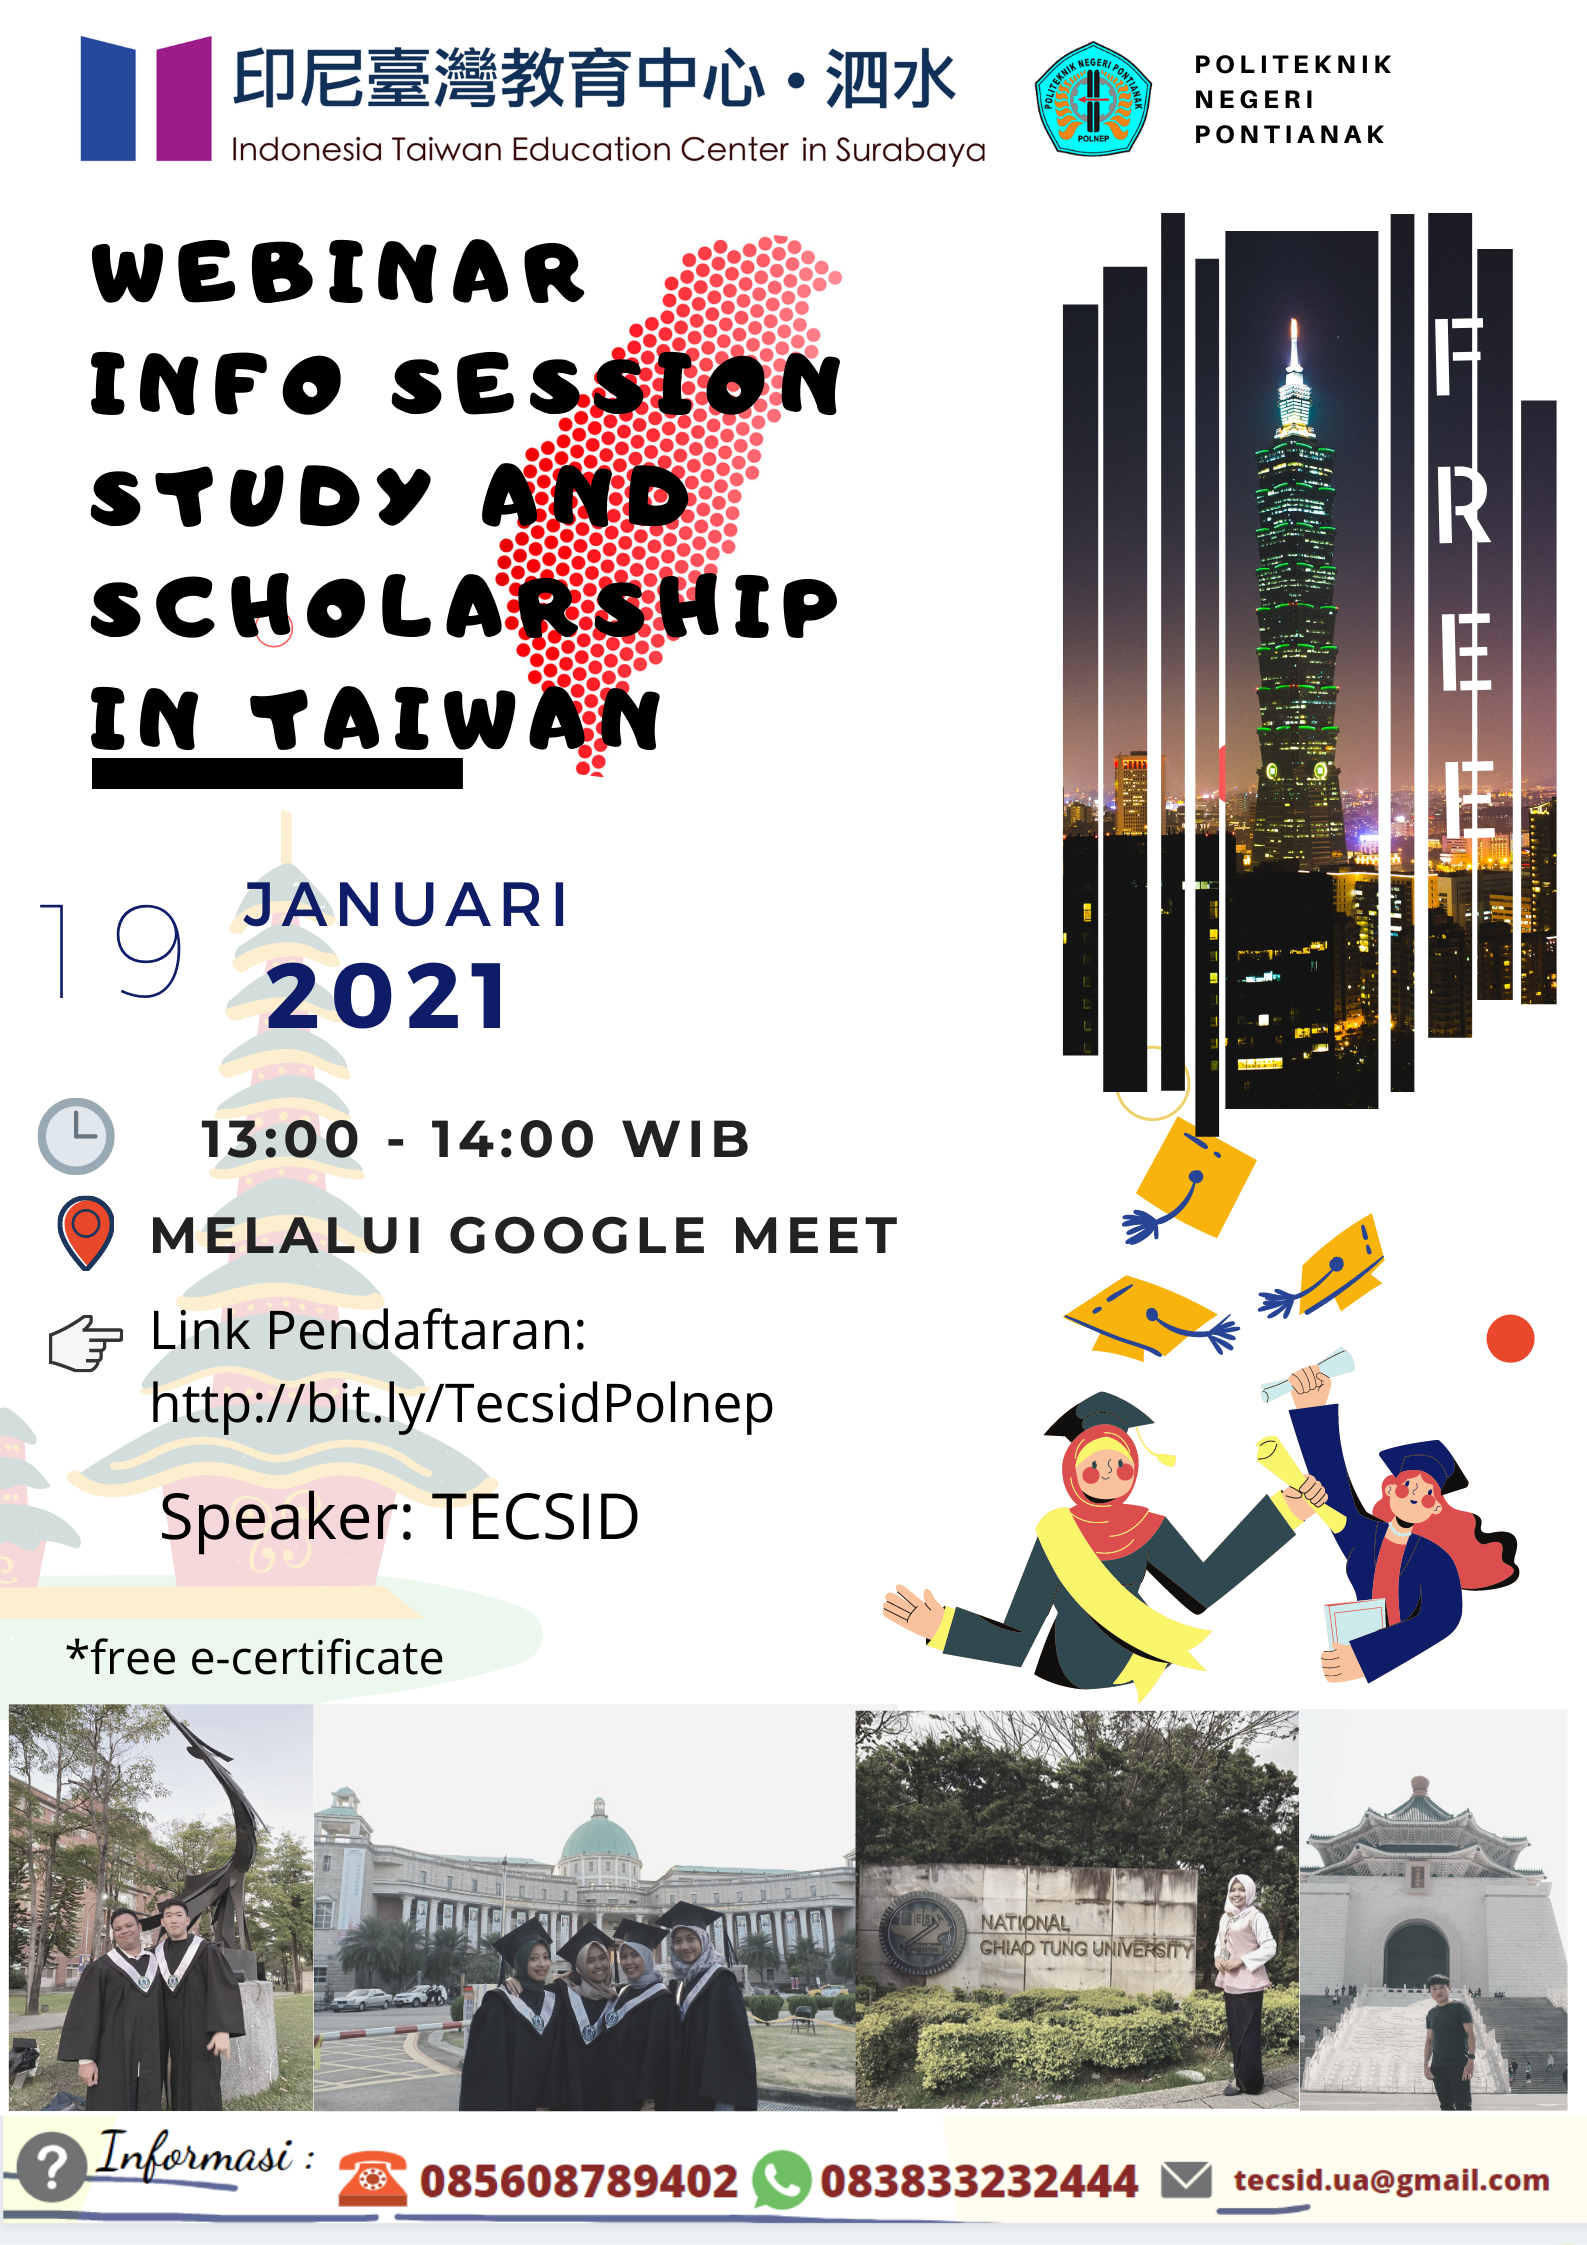 Webinar Info Session Study and Scholarship in Taiwan TECSIID - Pontianak State Polytechnic